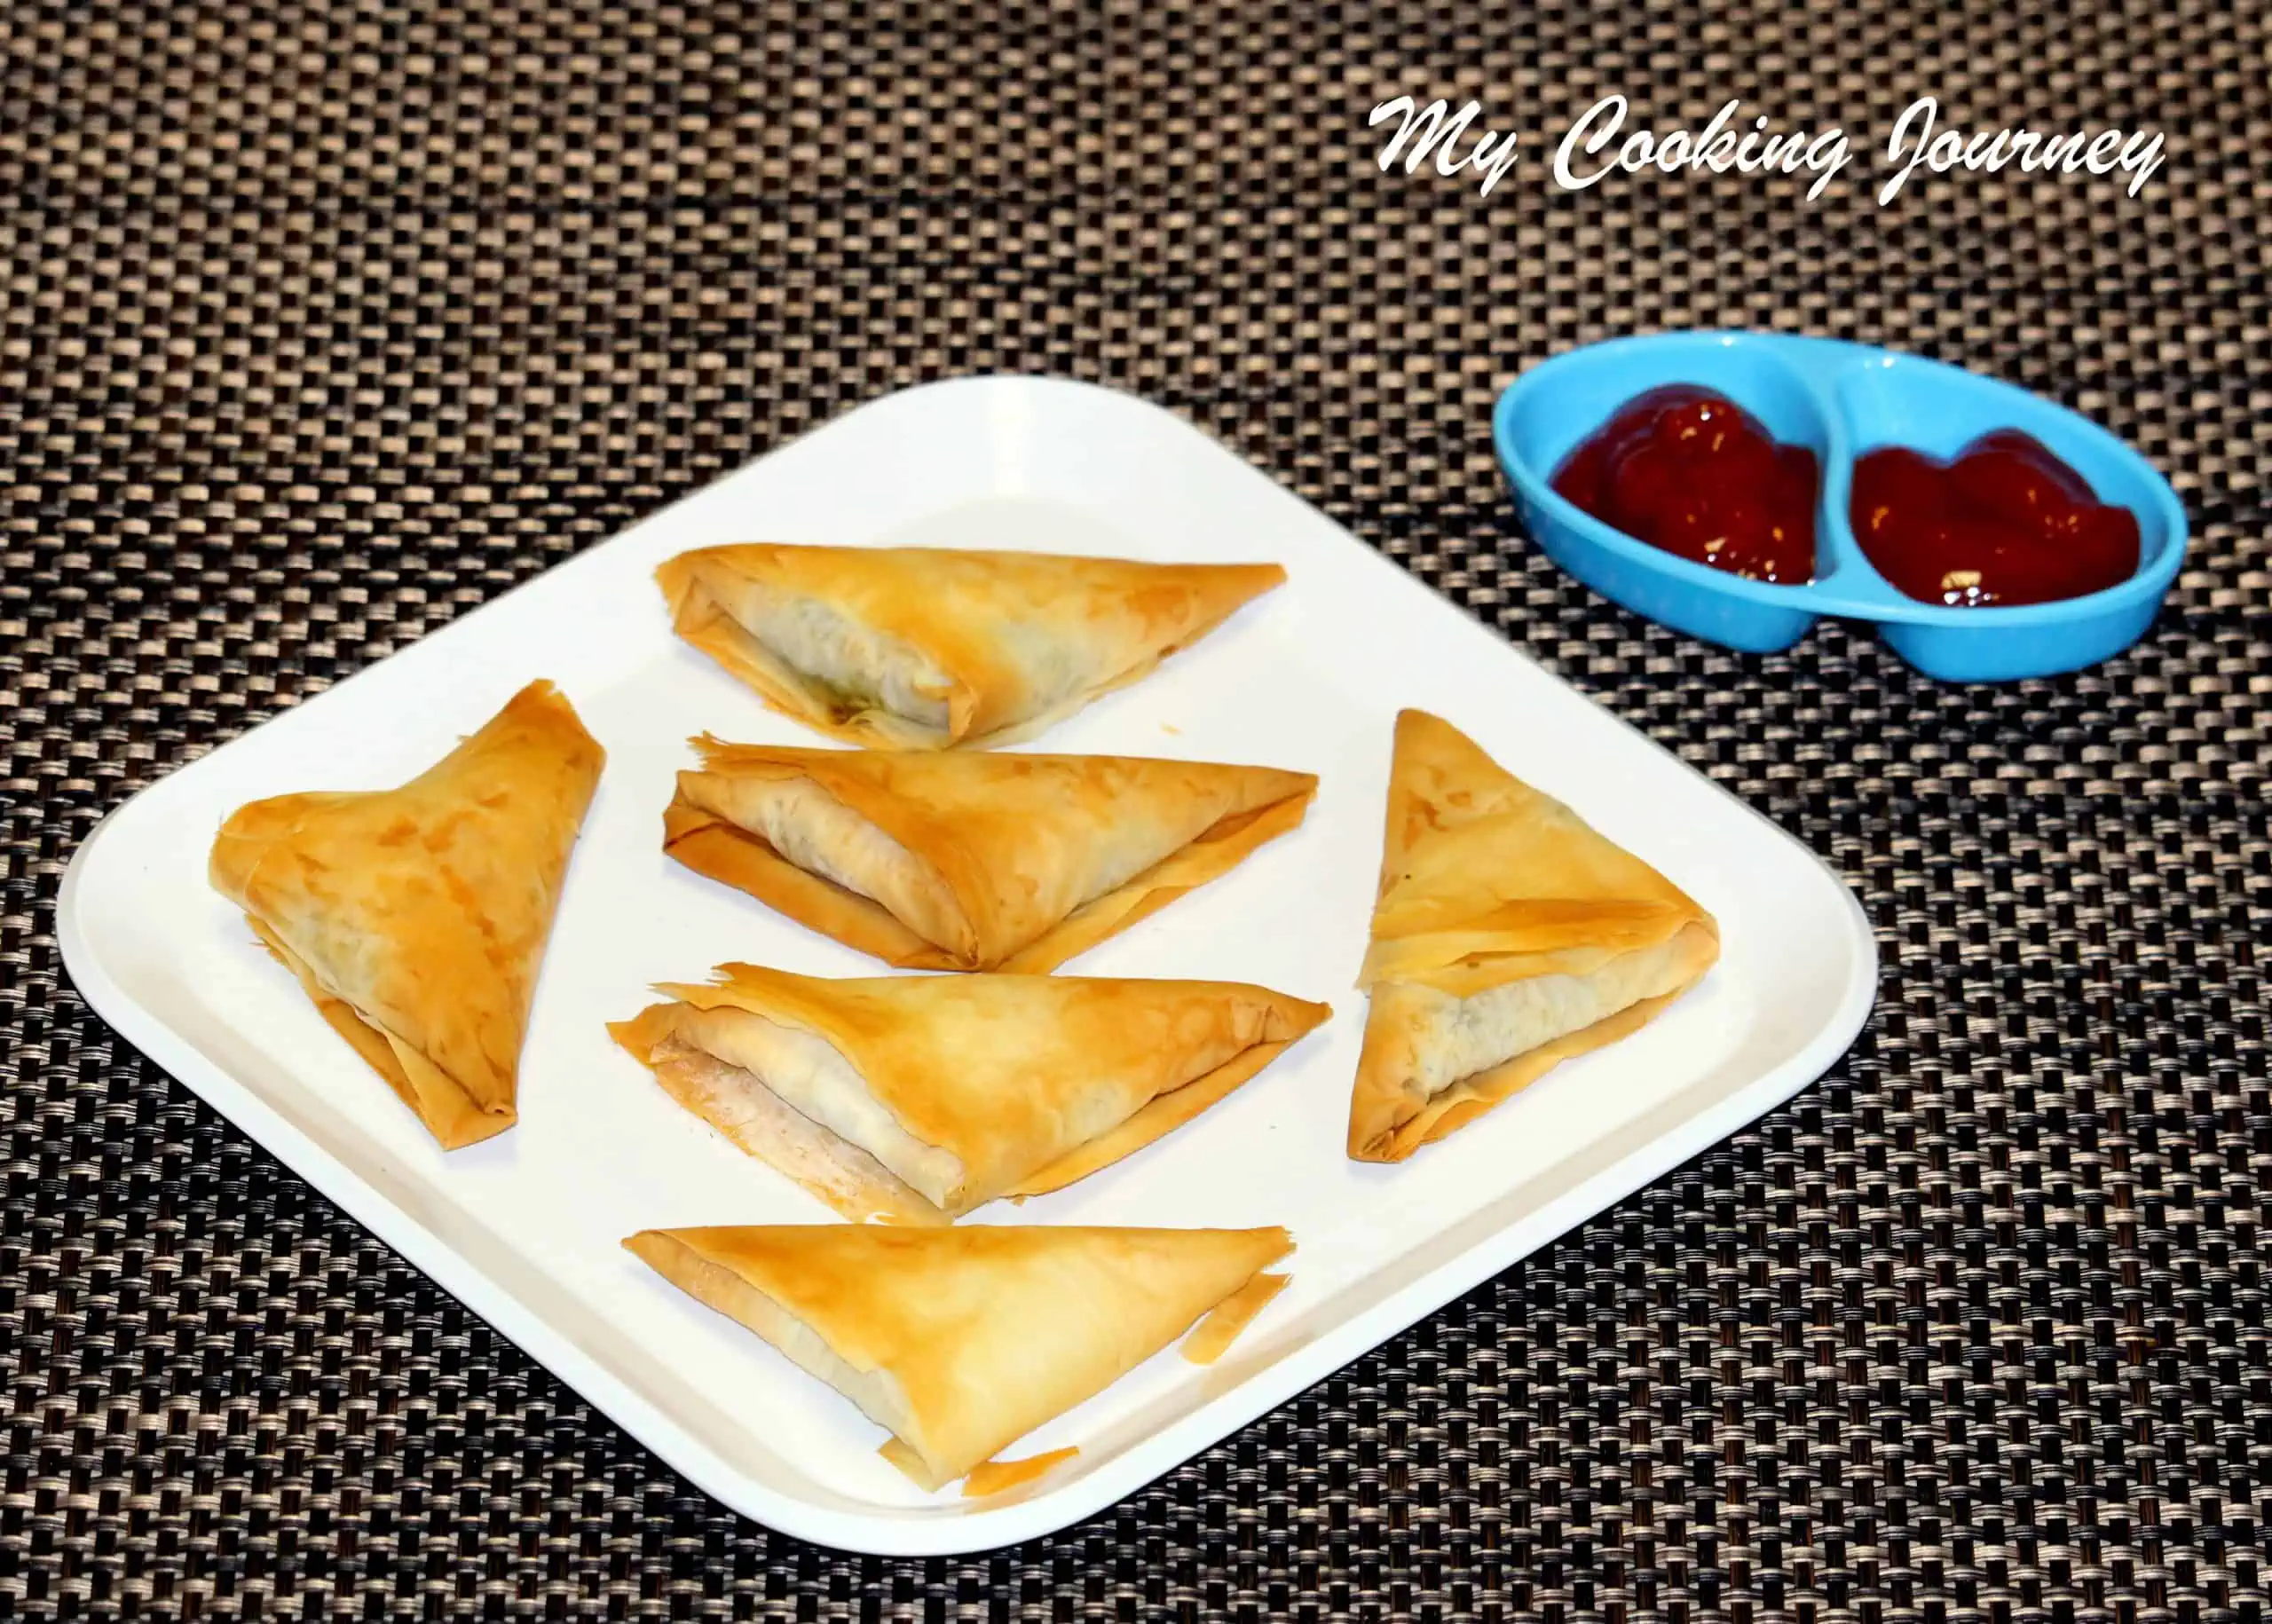 Samosa with ketchup on the side - Final Product